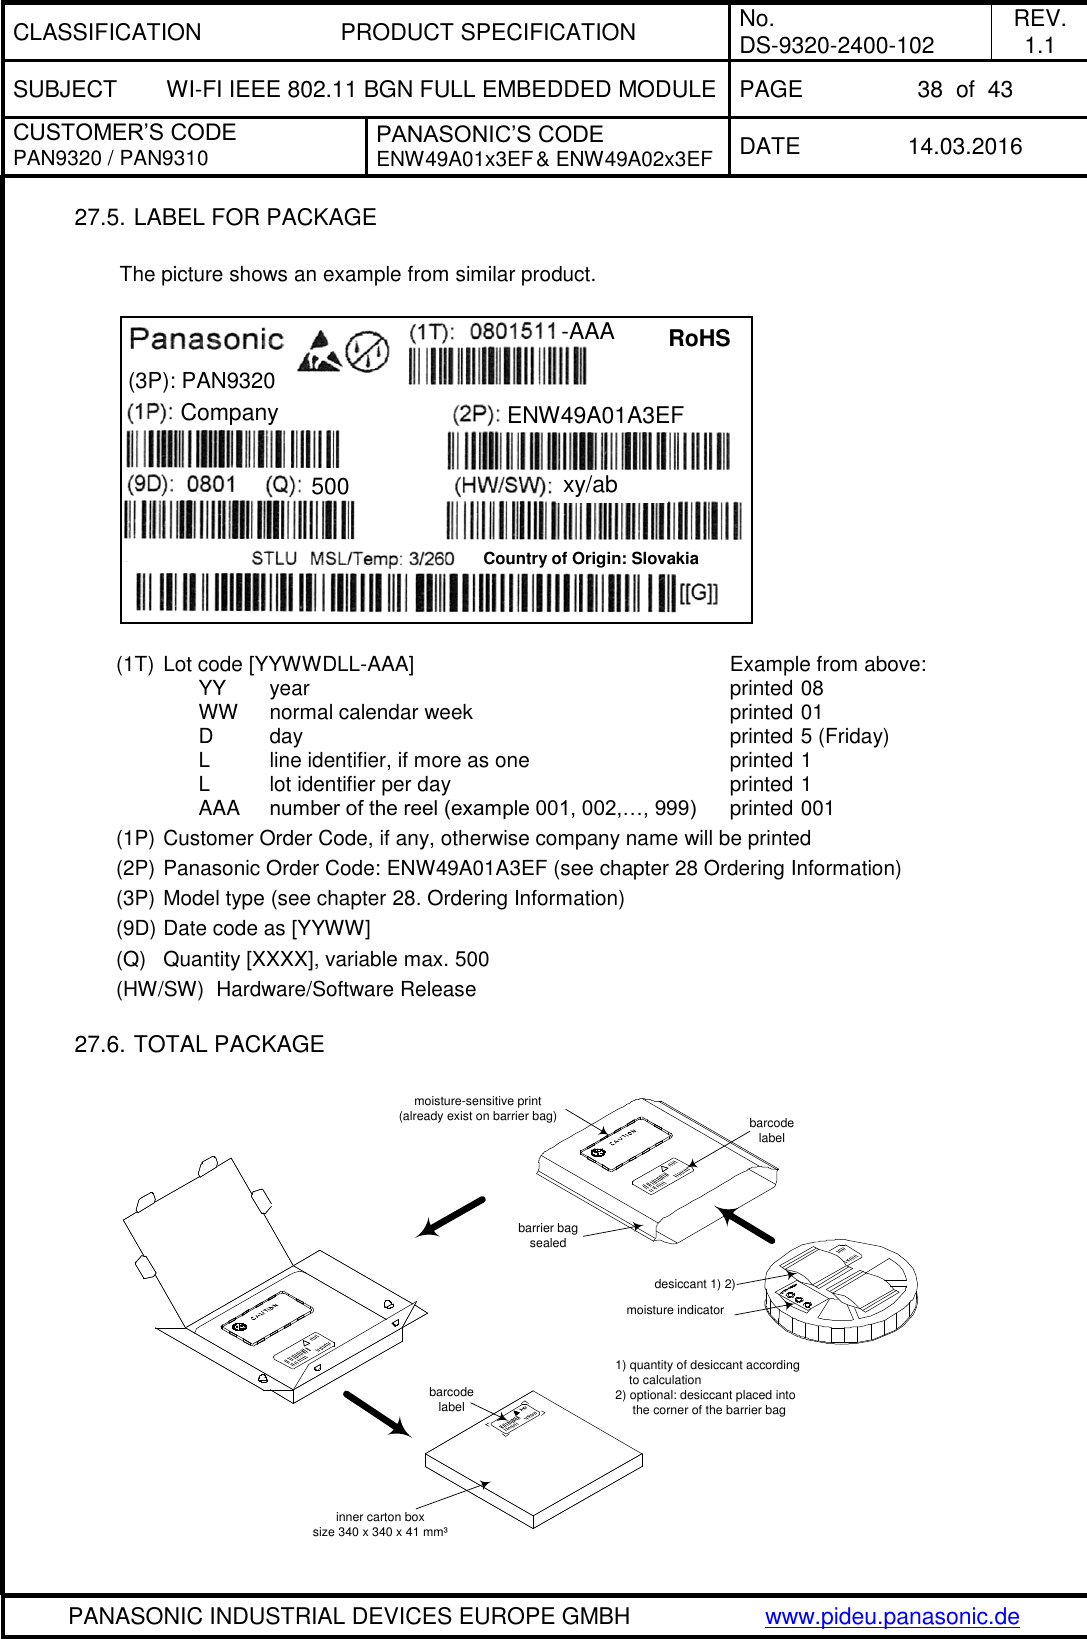 CLASSIFICATION PRODUCT SPECIFICATION No. DS-9320-2400-102 REV. 1.1 SUBJECT WI-FI IEEE 802.11 BGN FULL EMBEDDED MODULE PAGE 38  of  43 CUSTOMER’S CODE PAN9320 / PAN9310 PANASONIC’S CODE ENW49A01x3EF &amp; ENW49A02x3EF DATE 14.03.2016   PANASONIC INDUSTRIAL DEVICES EUROPE GMBH www.pideu.panasonic.de  27.5. LABEL FOR PACKAGE  The picture shows an example from similar product.    (1T)  Lot code [YYWWDLL-AAA]                                    Example from above:      YY   year                        printed 08      WW    normal calendar week                              printed 01           D       day                                                 printed 5 (Friday)           L       line identifier, if more as one                       printed 1           L       lot identifier per day                                printed 1           AAA    number of the reel (example 001, 002,…, 999)    printed 001 (1P) Customer Order Code, if any, otherwise company name will be printed (2P) Panasonic Order Code: ENW49A01A3EF (see chapter 28 Ordering Information) (3P) Model type (see chapter 28. Ordering Information) (9D) Date code as [YYWW] (Q)  Quantity [XXXX], variable max. 500 (HW/SW)  Hardware/Software Release       27.6. TOTAL PACKAGE   barcodelabelmoisture-sensitive print(already exist on barrier bag) barcodelabeldesiccant 1) 2)moisture indicatorbarrier bagsealedinner carton boxsize 340 x 340 x 41 mm³1) quantity of desiccant according    to calculation2) optional: desiccant placed into     the corner of the barrier bag (3P): PAN9320  RoHS  -AAA  ENW49A01A3EF  Company  500 xy/ab  Country of Origin: Slovakia 